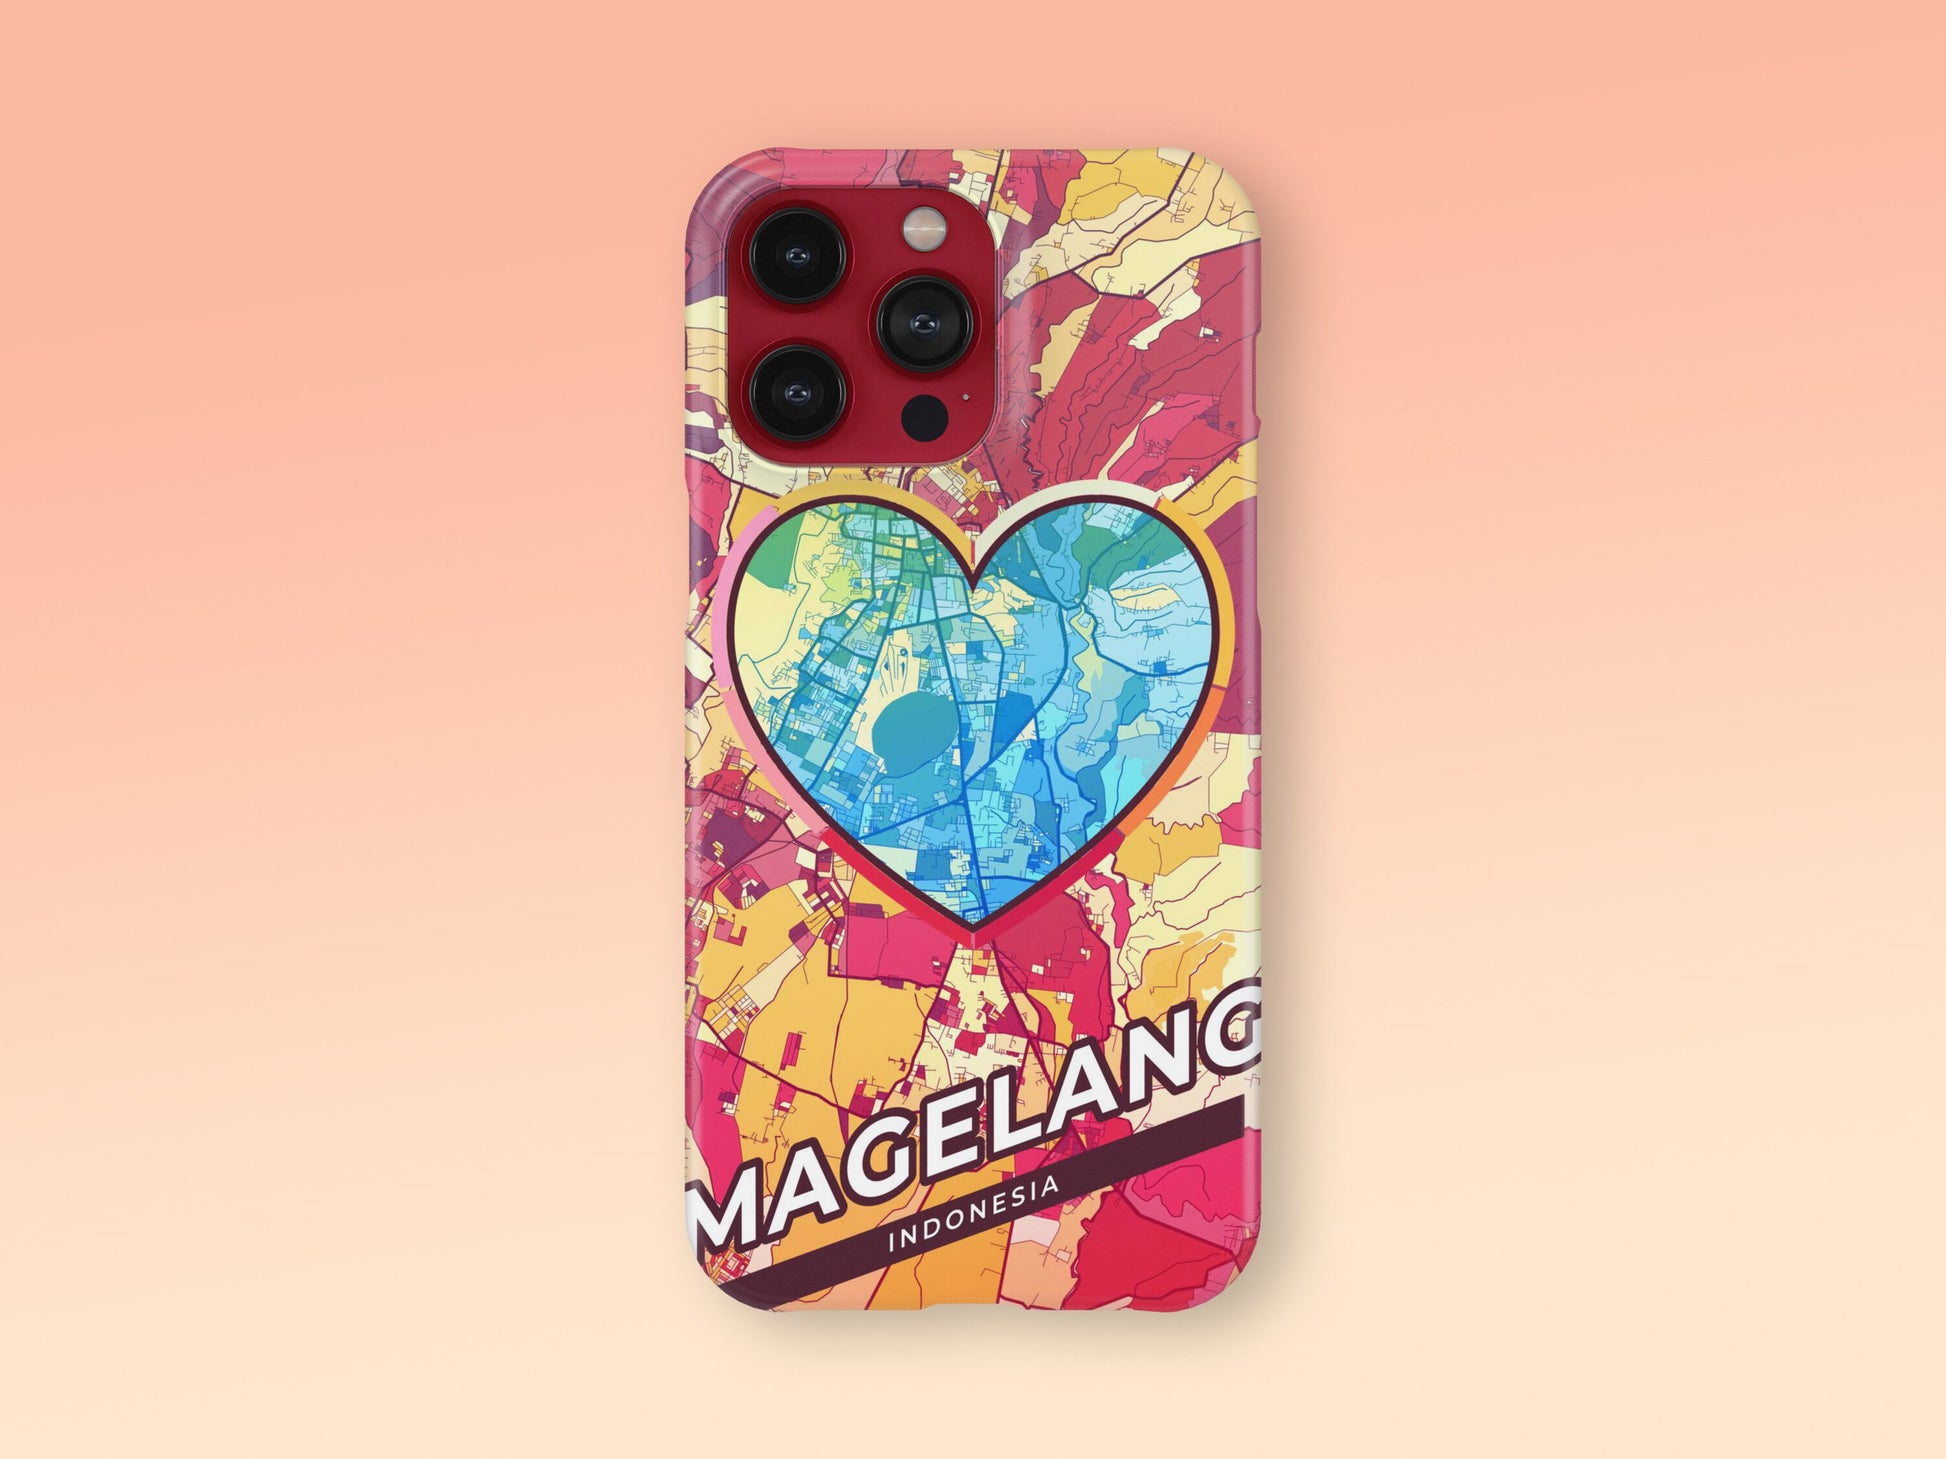 Magelang Indonesia slim phone case with colorful icon. Birthday, wedding or housewarming gift. Couple match cases. 2